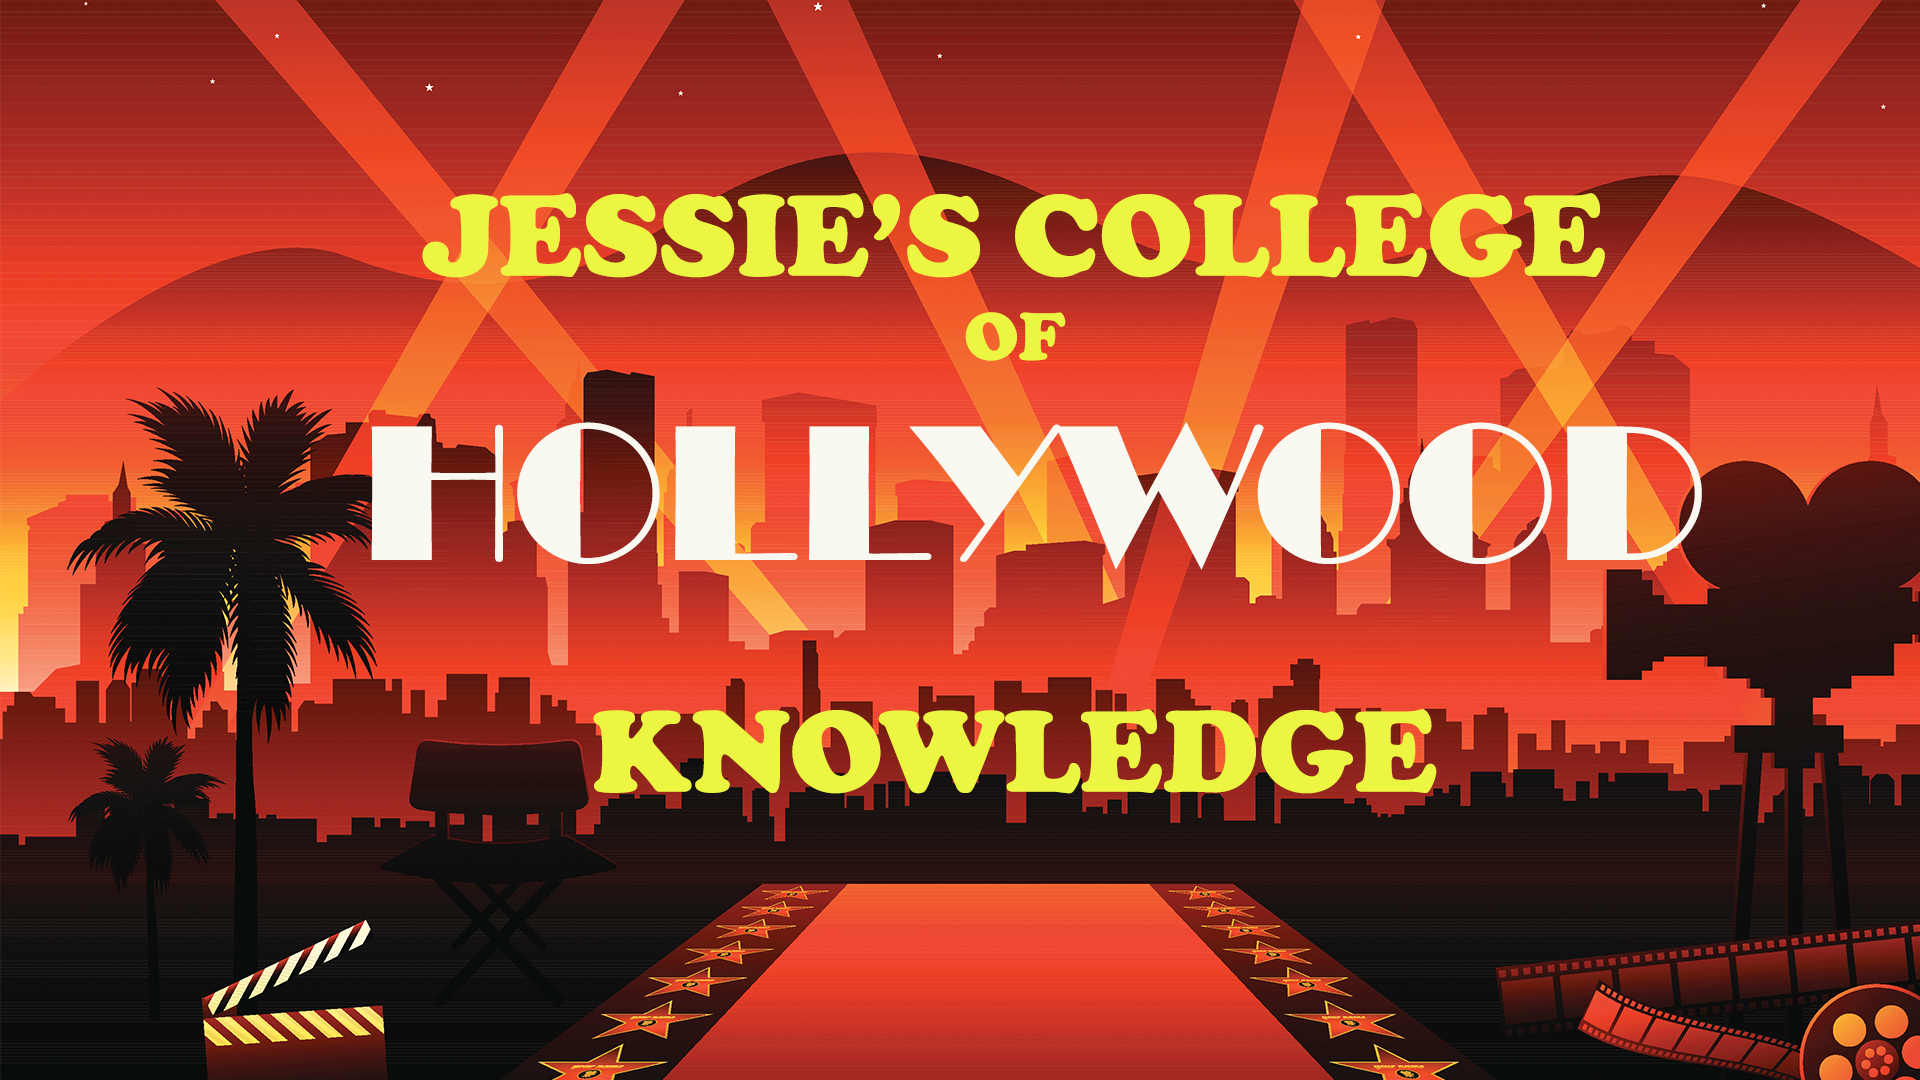 4/19/2024 7:40 Jessie's College of Hollywood Knowledge